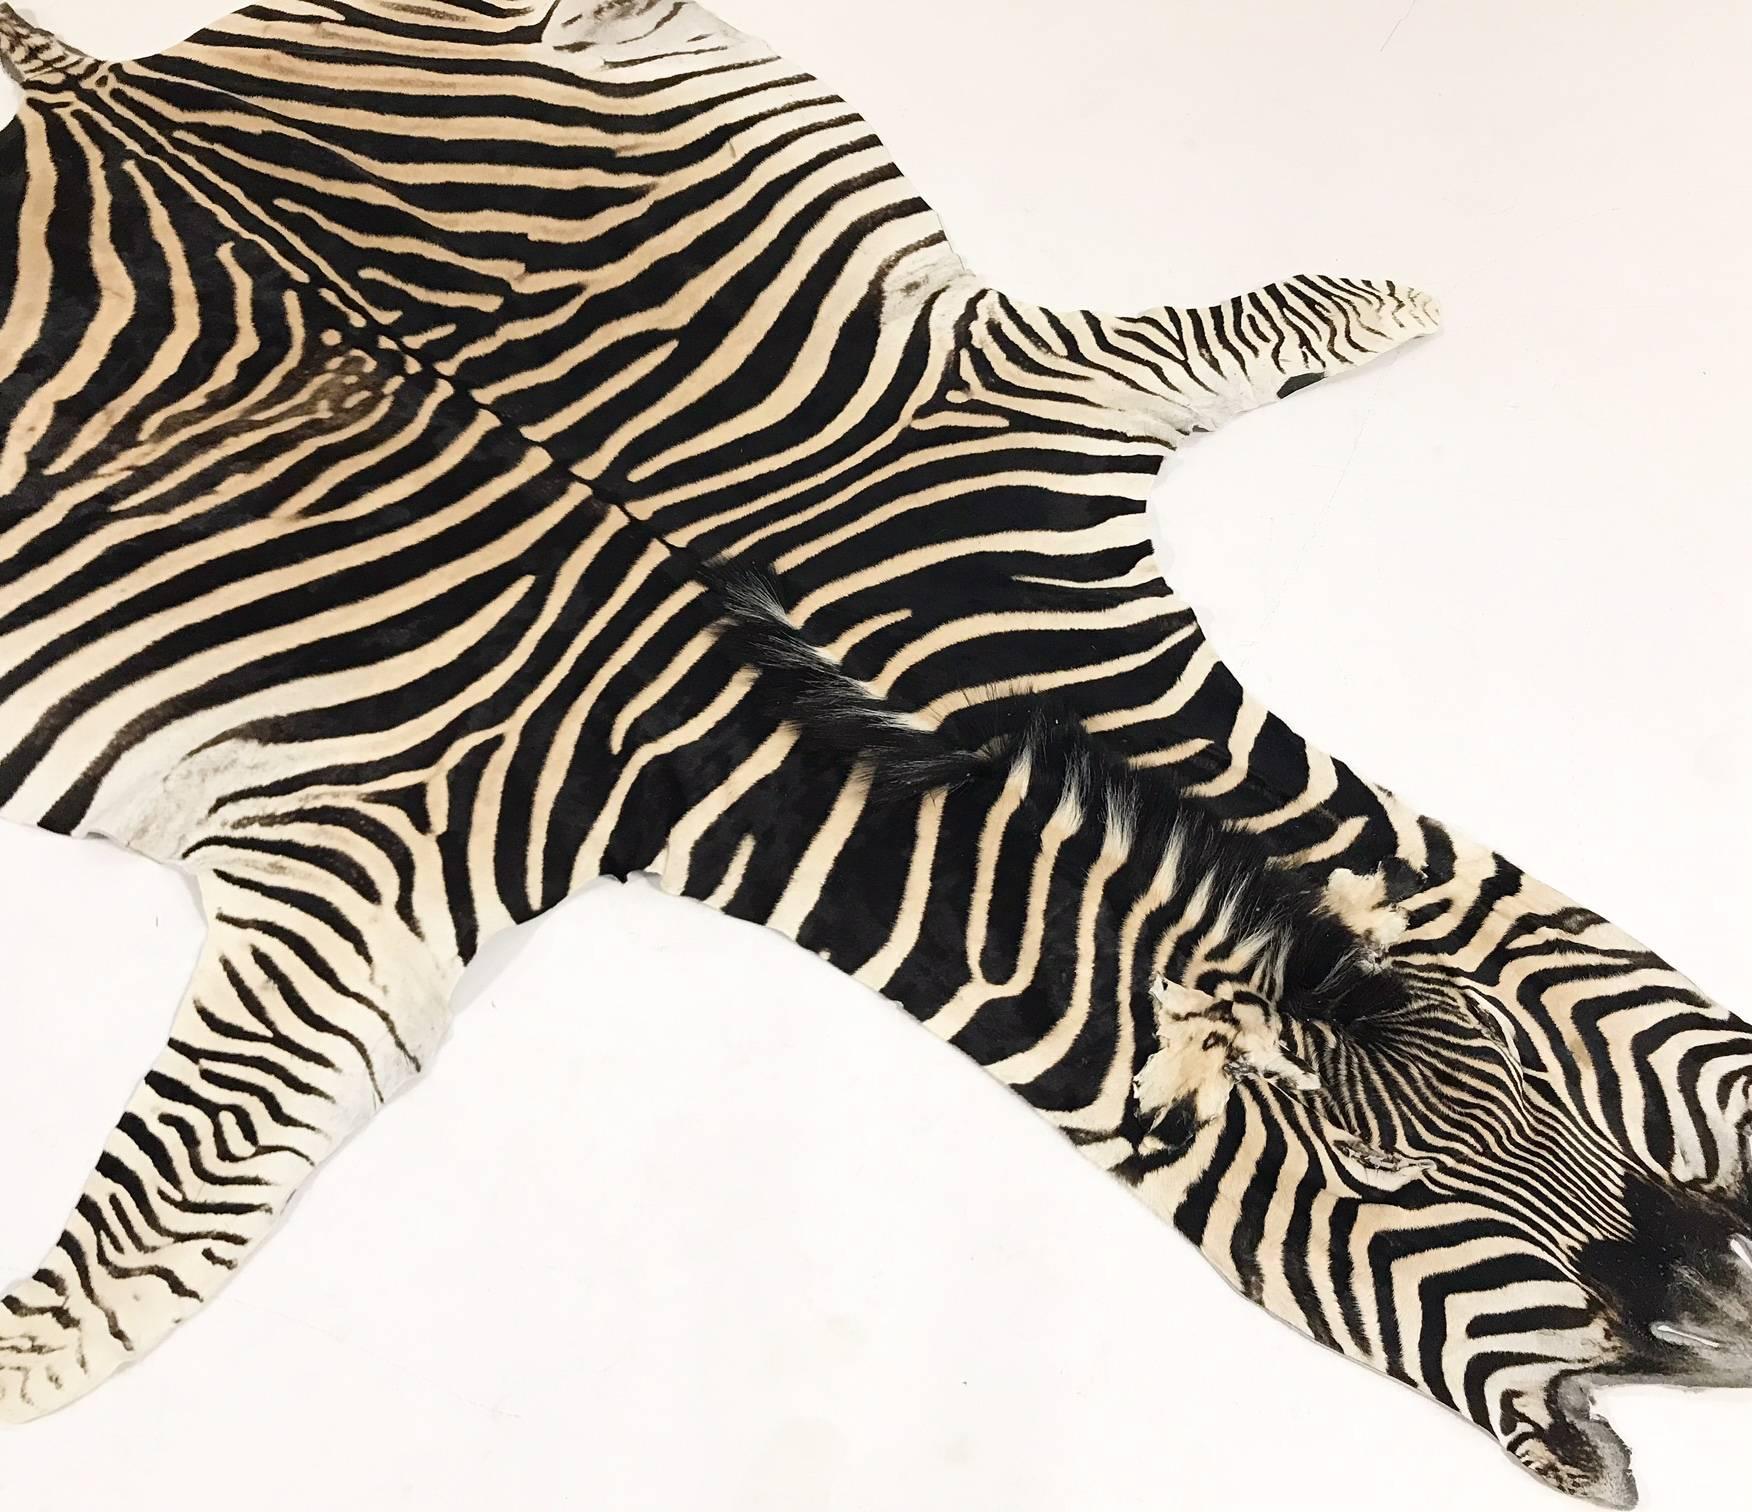 Zebra hides are hand selected with a critical eye for their one-of-a-kind coloring, stripe patterns, and natural markings by our team. Each hide is unique and meets our high standards of hair quality, tanning excellence, and size. Zebra hide rugs